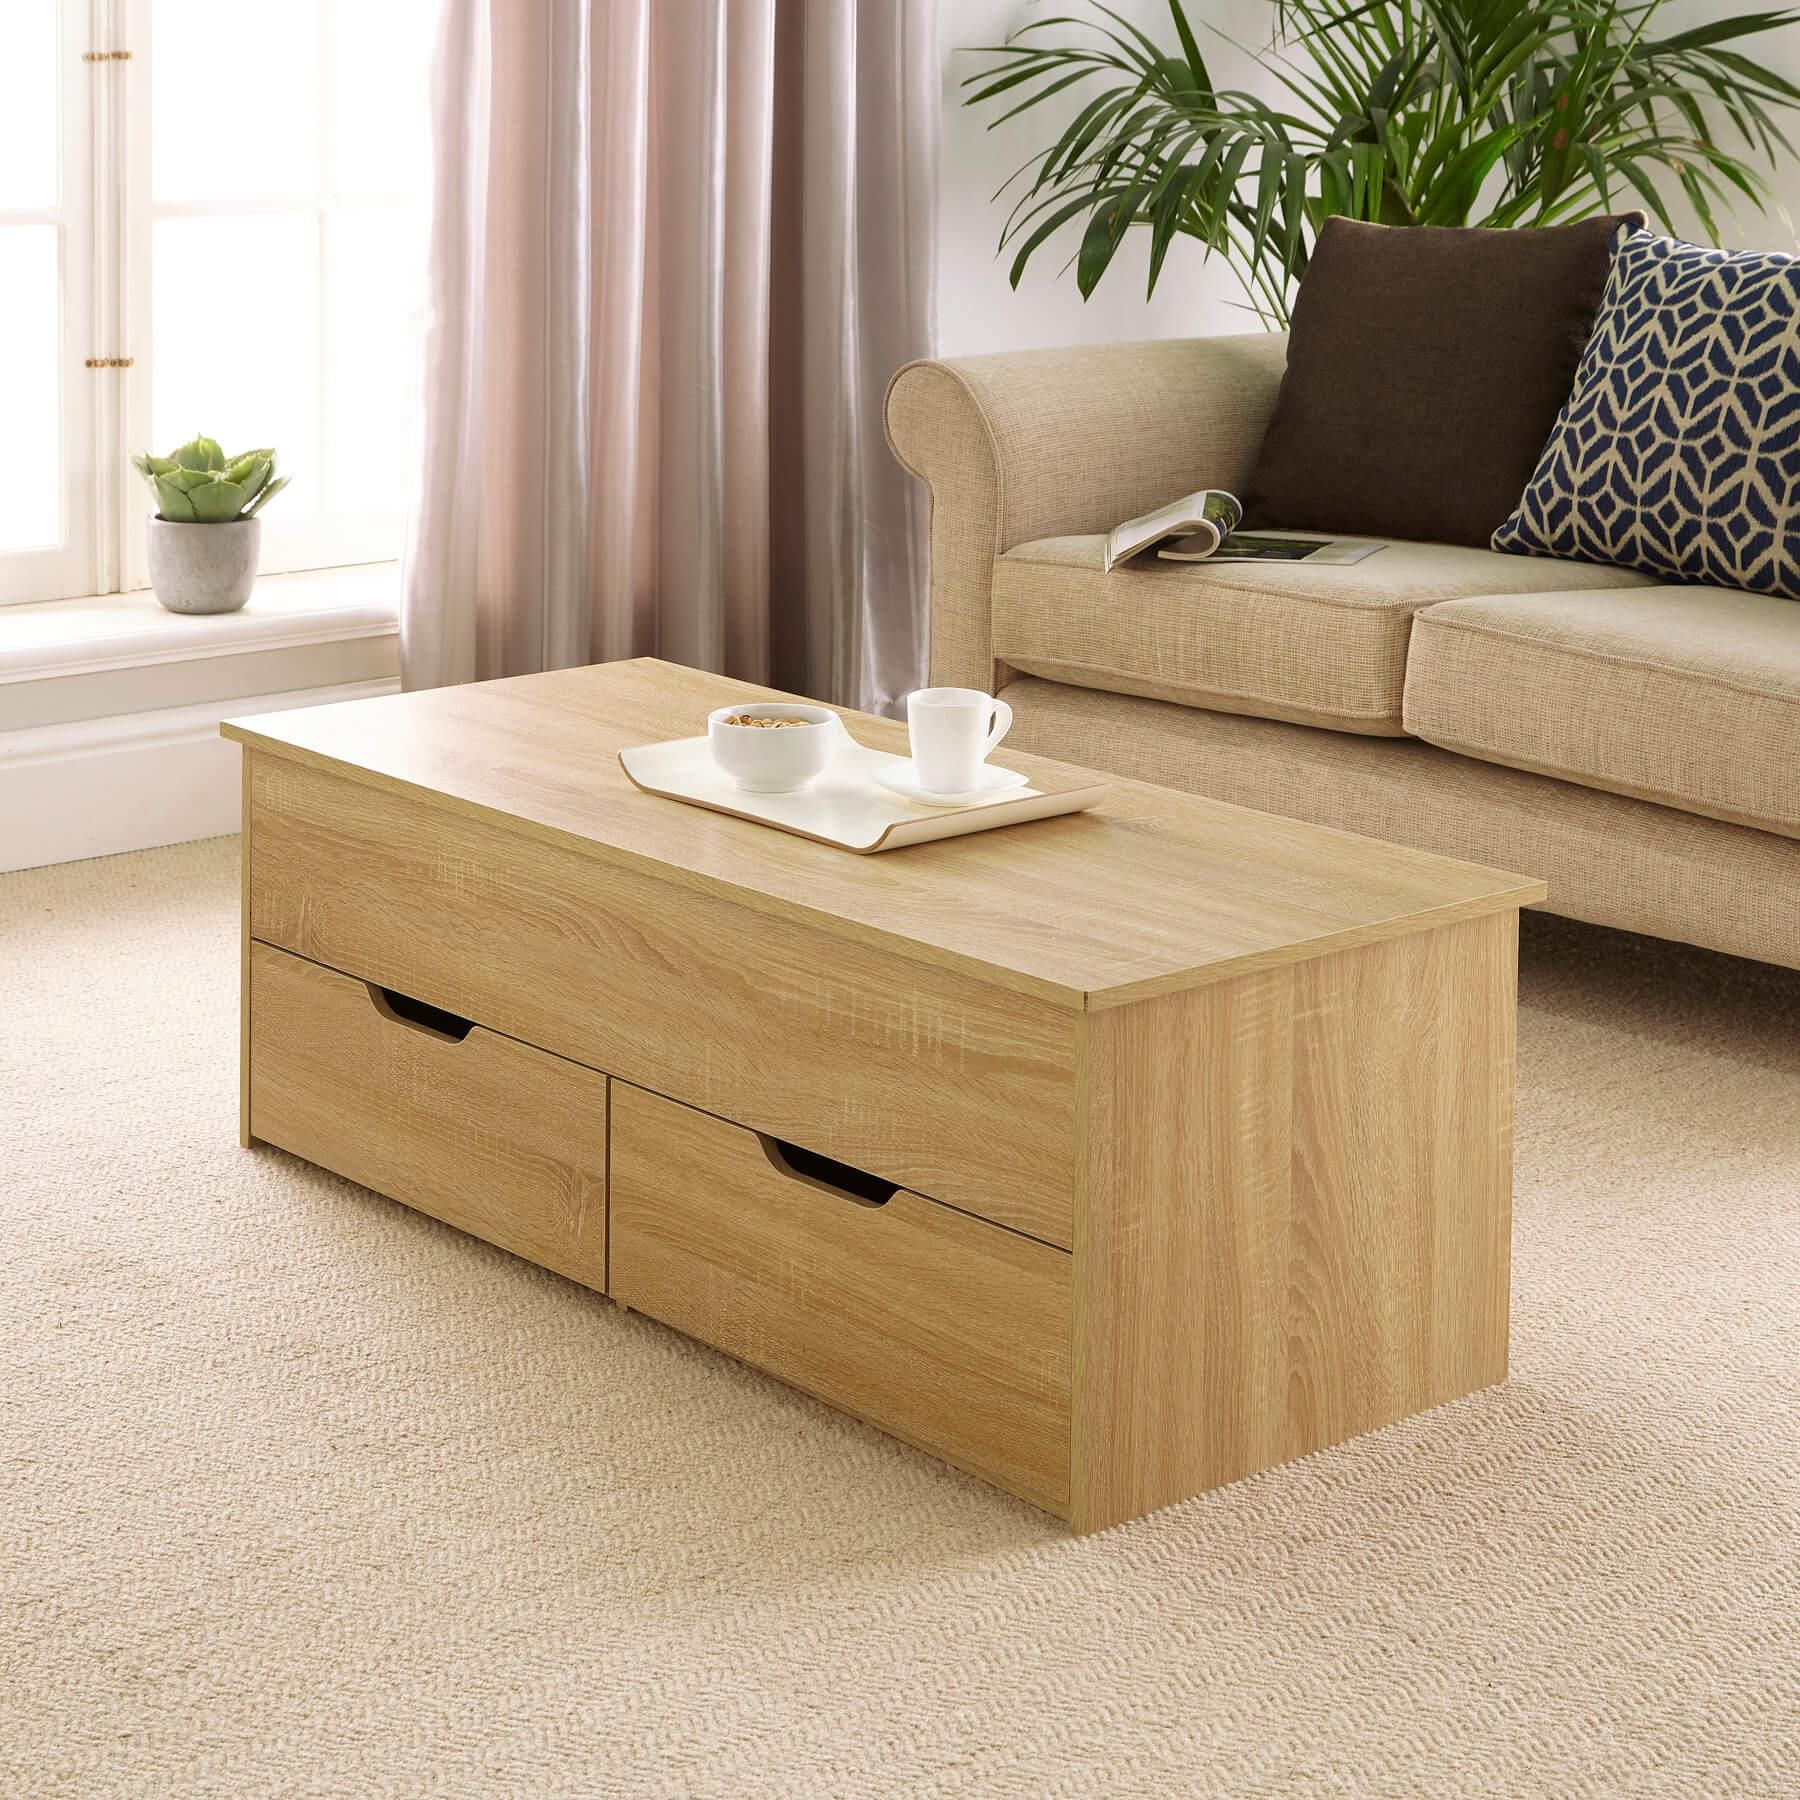 Oak Wooden Coffee Table With Lift Up Top And 2 Large Storage Drawers Regarding Lift Top Coffee Tables With Storage Drawers (Photo 9 of 15)